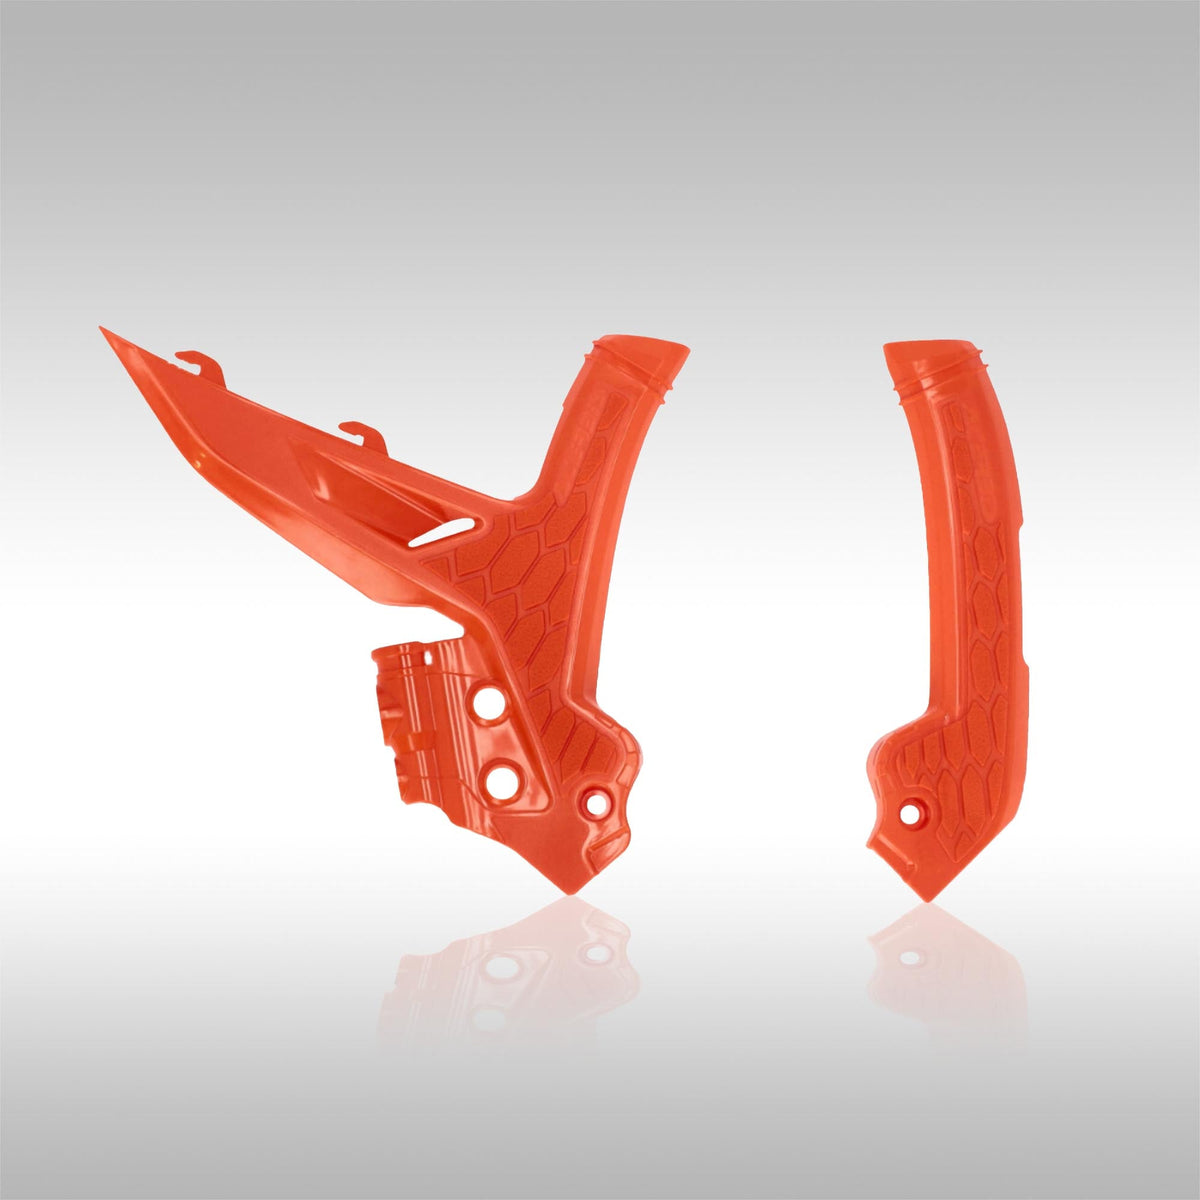 Acerbis X-Frame Protectors for the new generation of KTM dirtbikes and dualsport machines. Protect the frame and increase grip and control all with one part. Dirtbike frame guard in orange / orange.